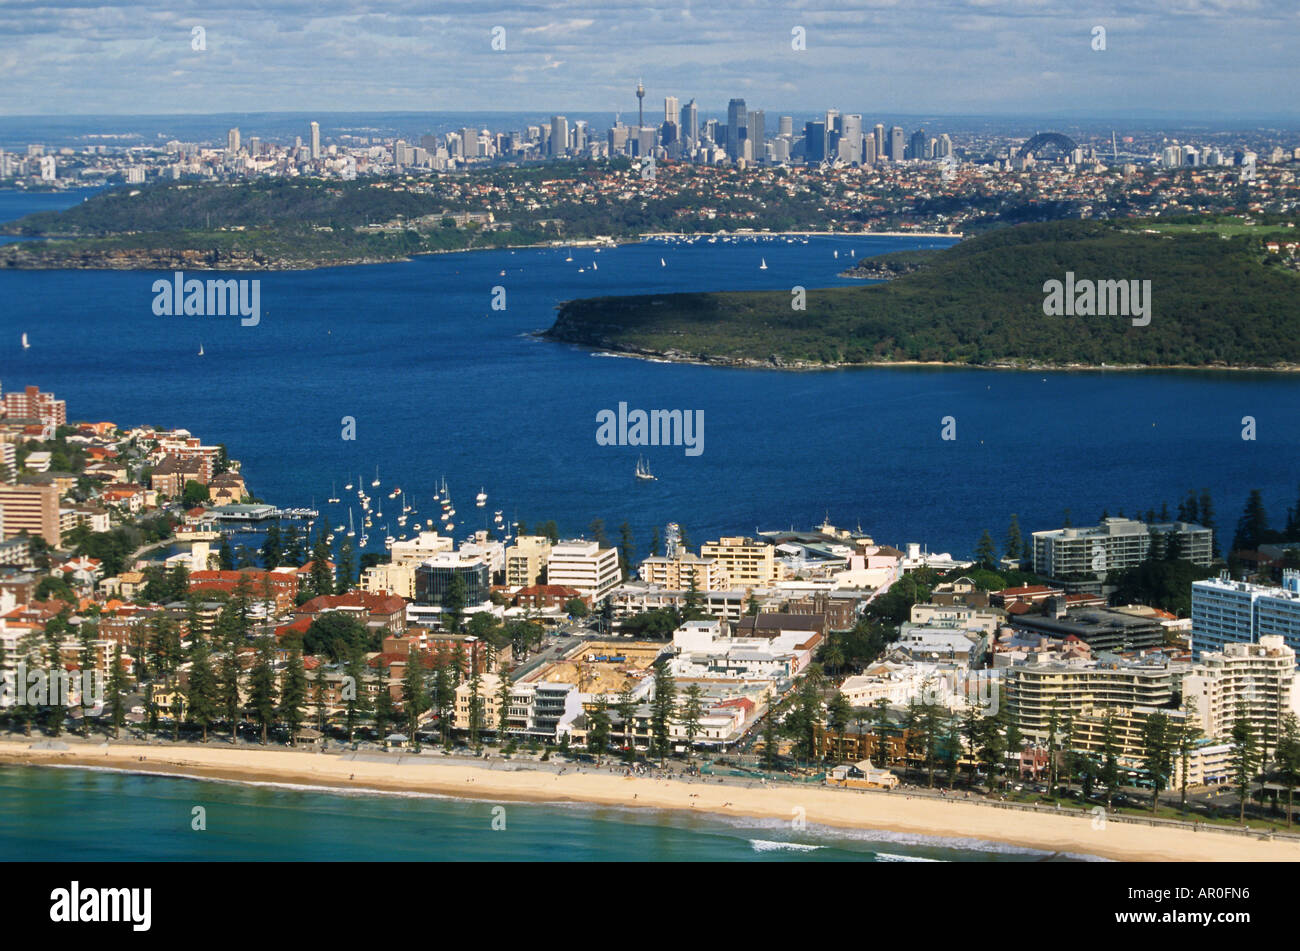 Manly beach and Sydney Harbour, from the air, Australien, NSW, Manly, Sydney Harbour aerial photo, Luftaufnahme von Badeort Manl Stock Photo